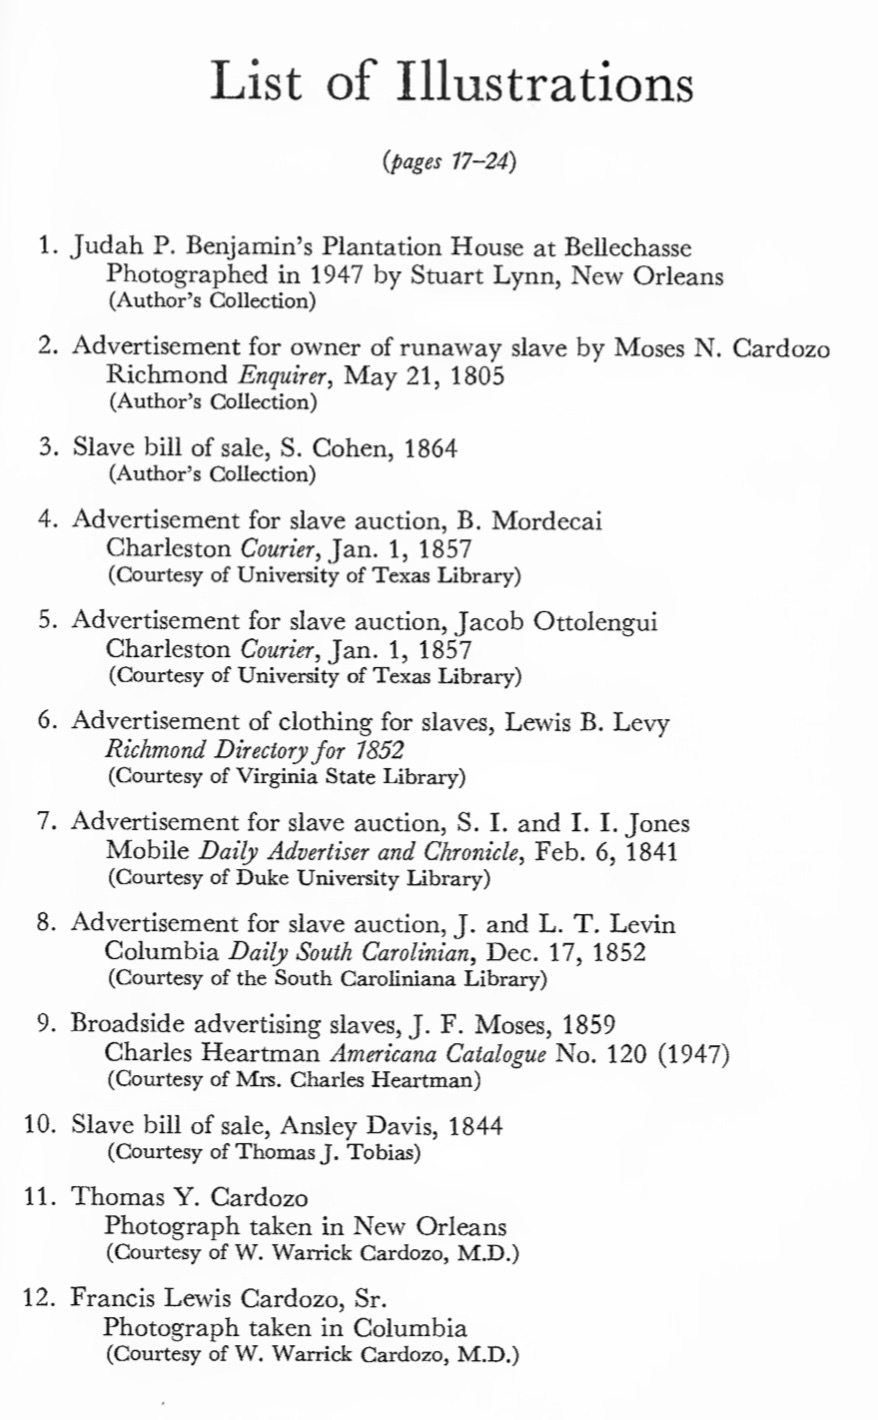 List of Illustrations in Jews and Negro Slavery in The Old South - 1789-1865